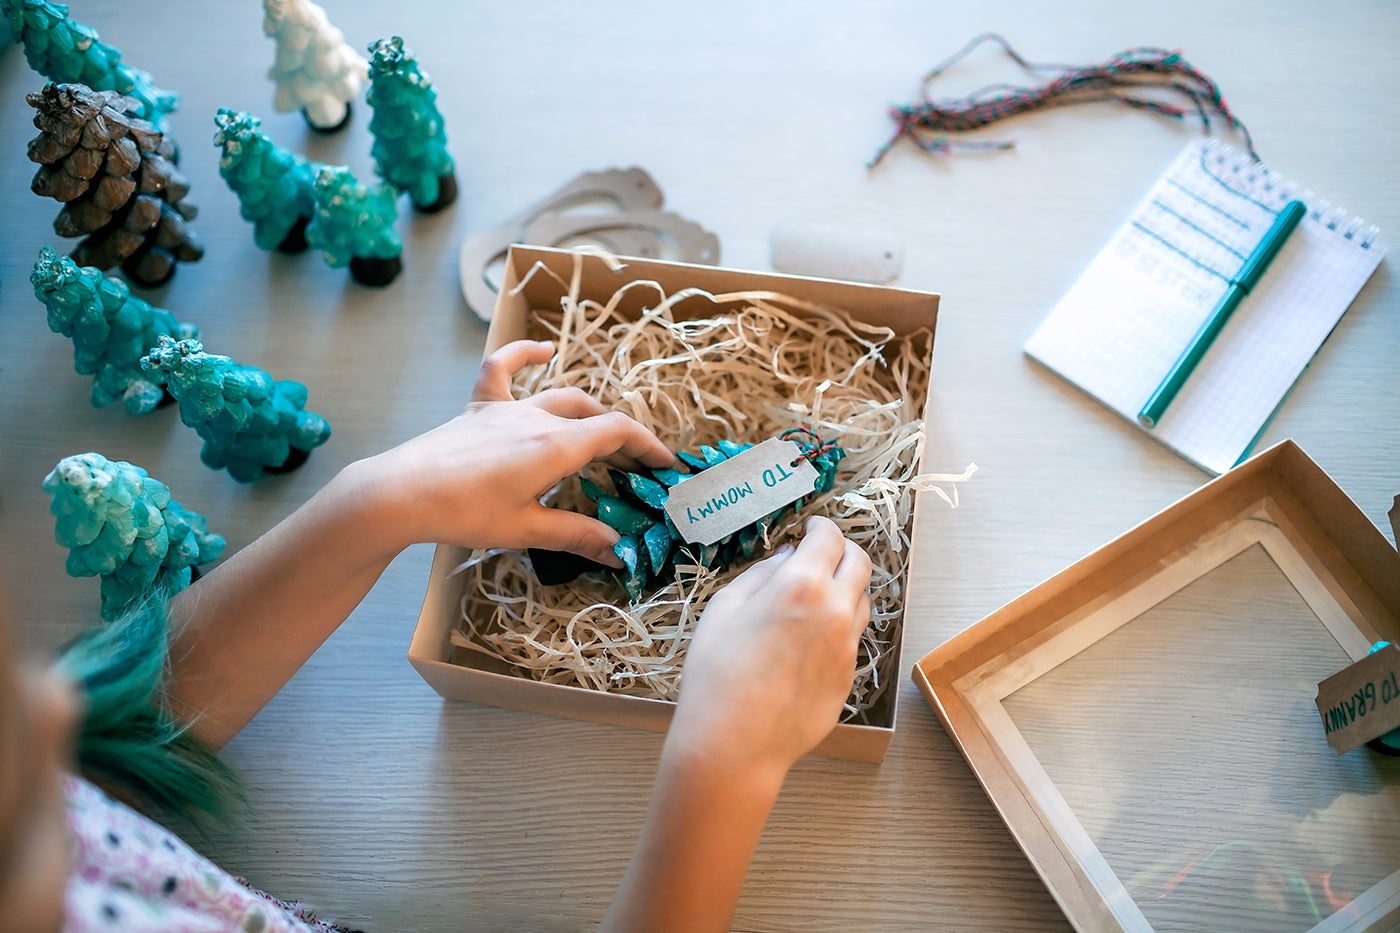 Easy & Memorable Preschool Christmas Gifts For Parents